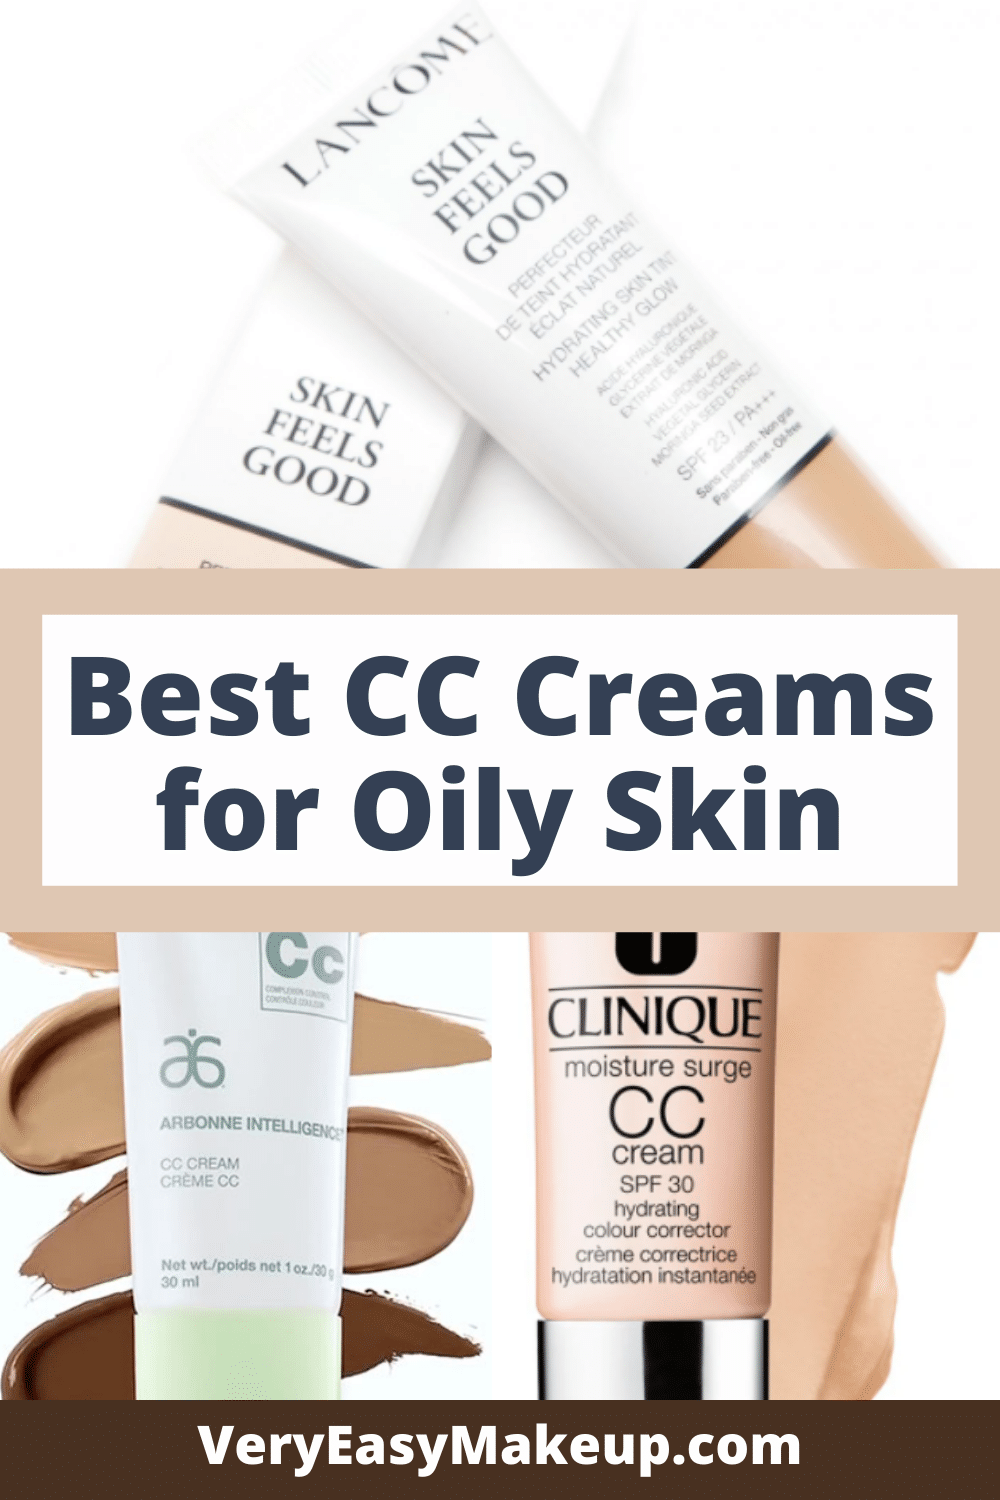 Best CC Creams for Oily Skin